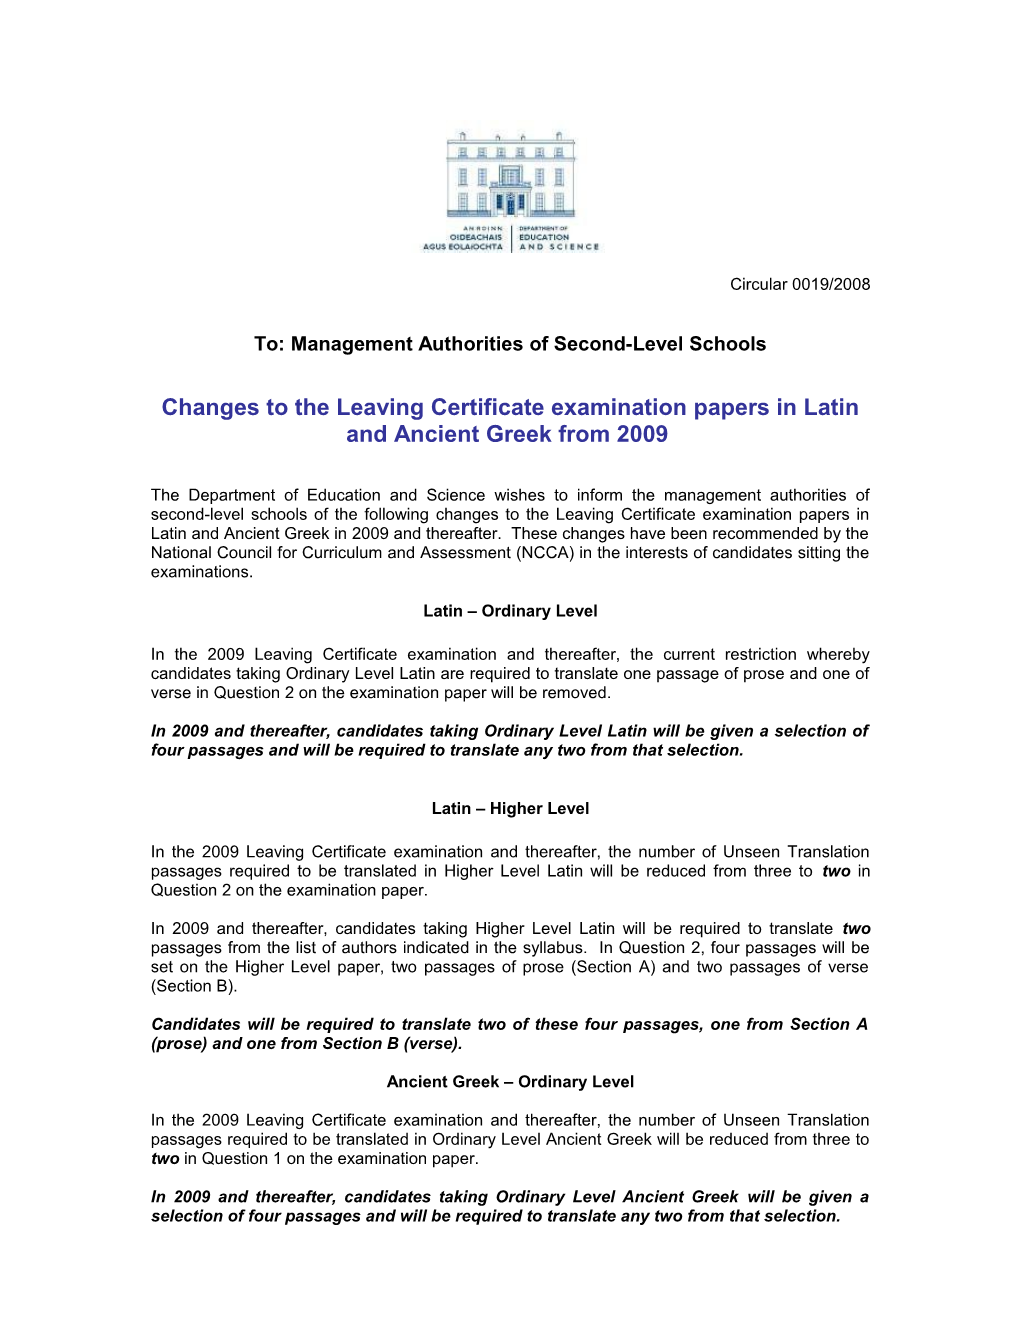 Circular 0019/2008 - Changes to the Leaving Certificate Examination Papers in Latin And